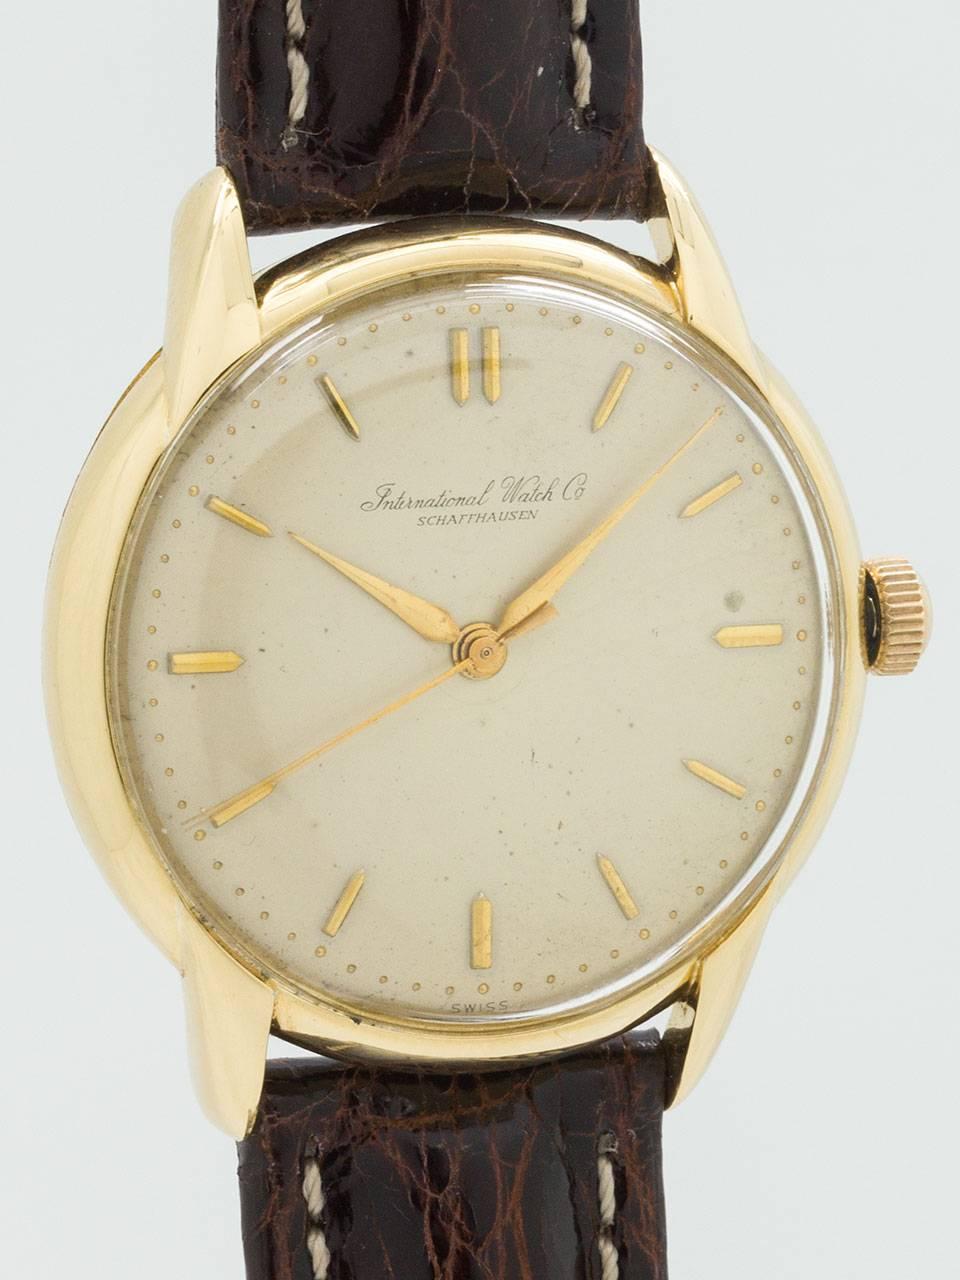 International Watch Co 18K Yellow Gold Dress Model circa 1950s. Featuring 35 x 40mm heavy snap back case with extended horn lugs and acrylic crystal. Original lightly patina’d matte silvered dial with raised gold indexes and tapered elongated hands.